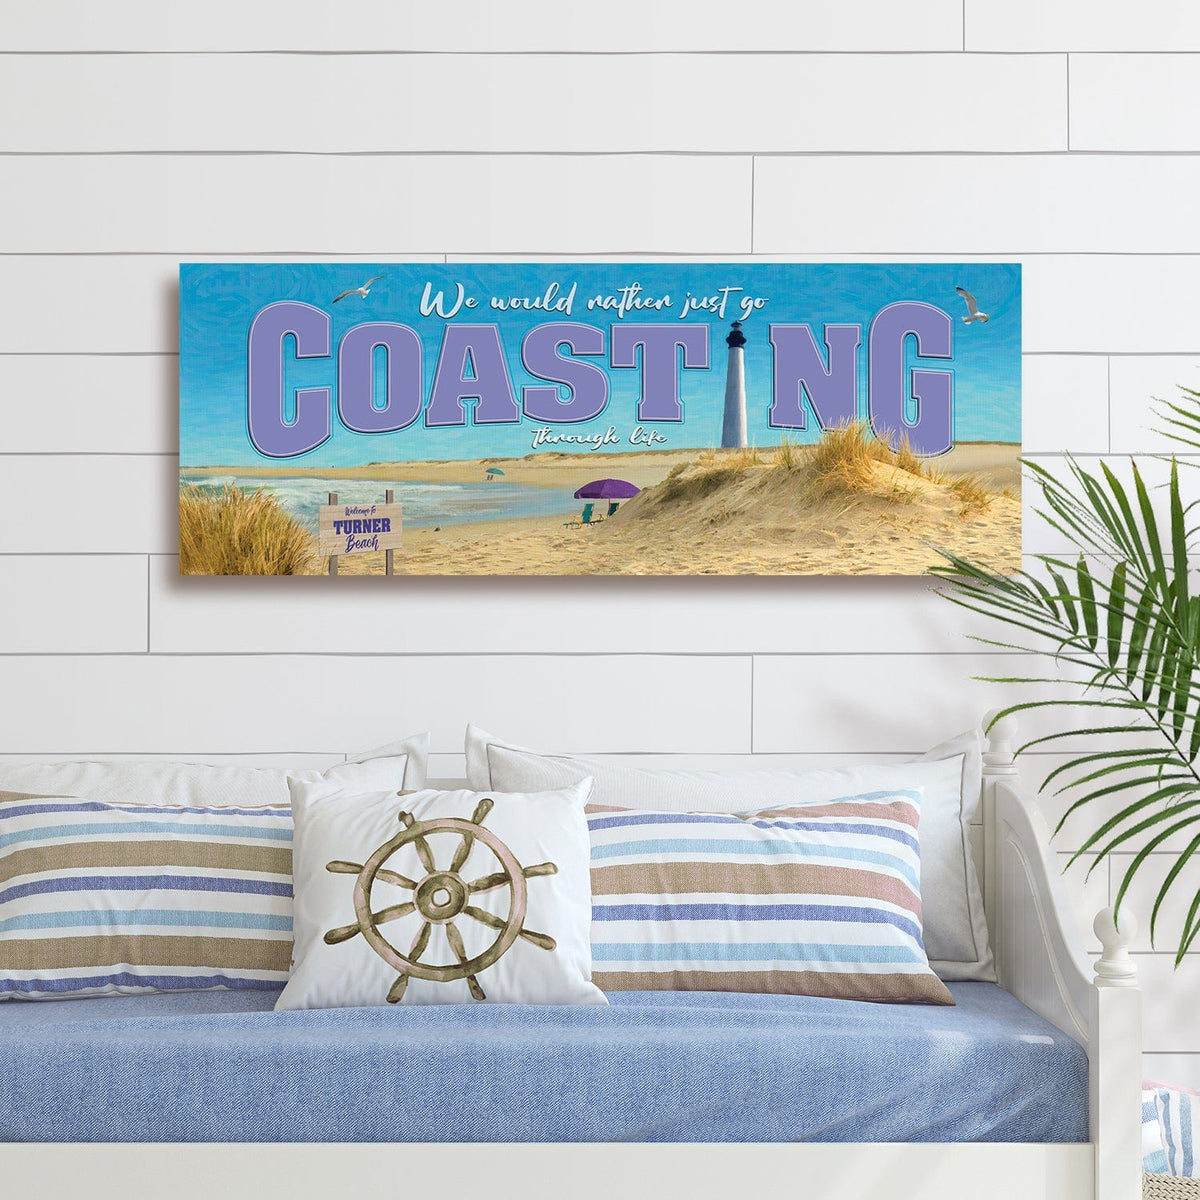 Beach theme decor from Personal Prints